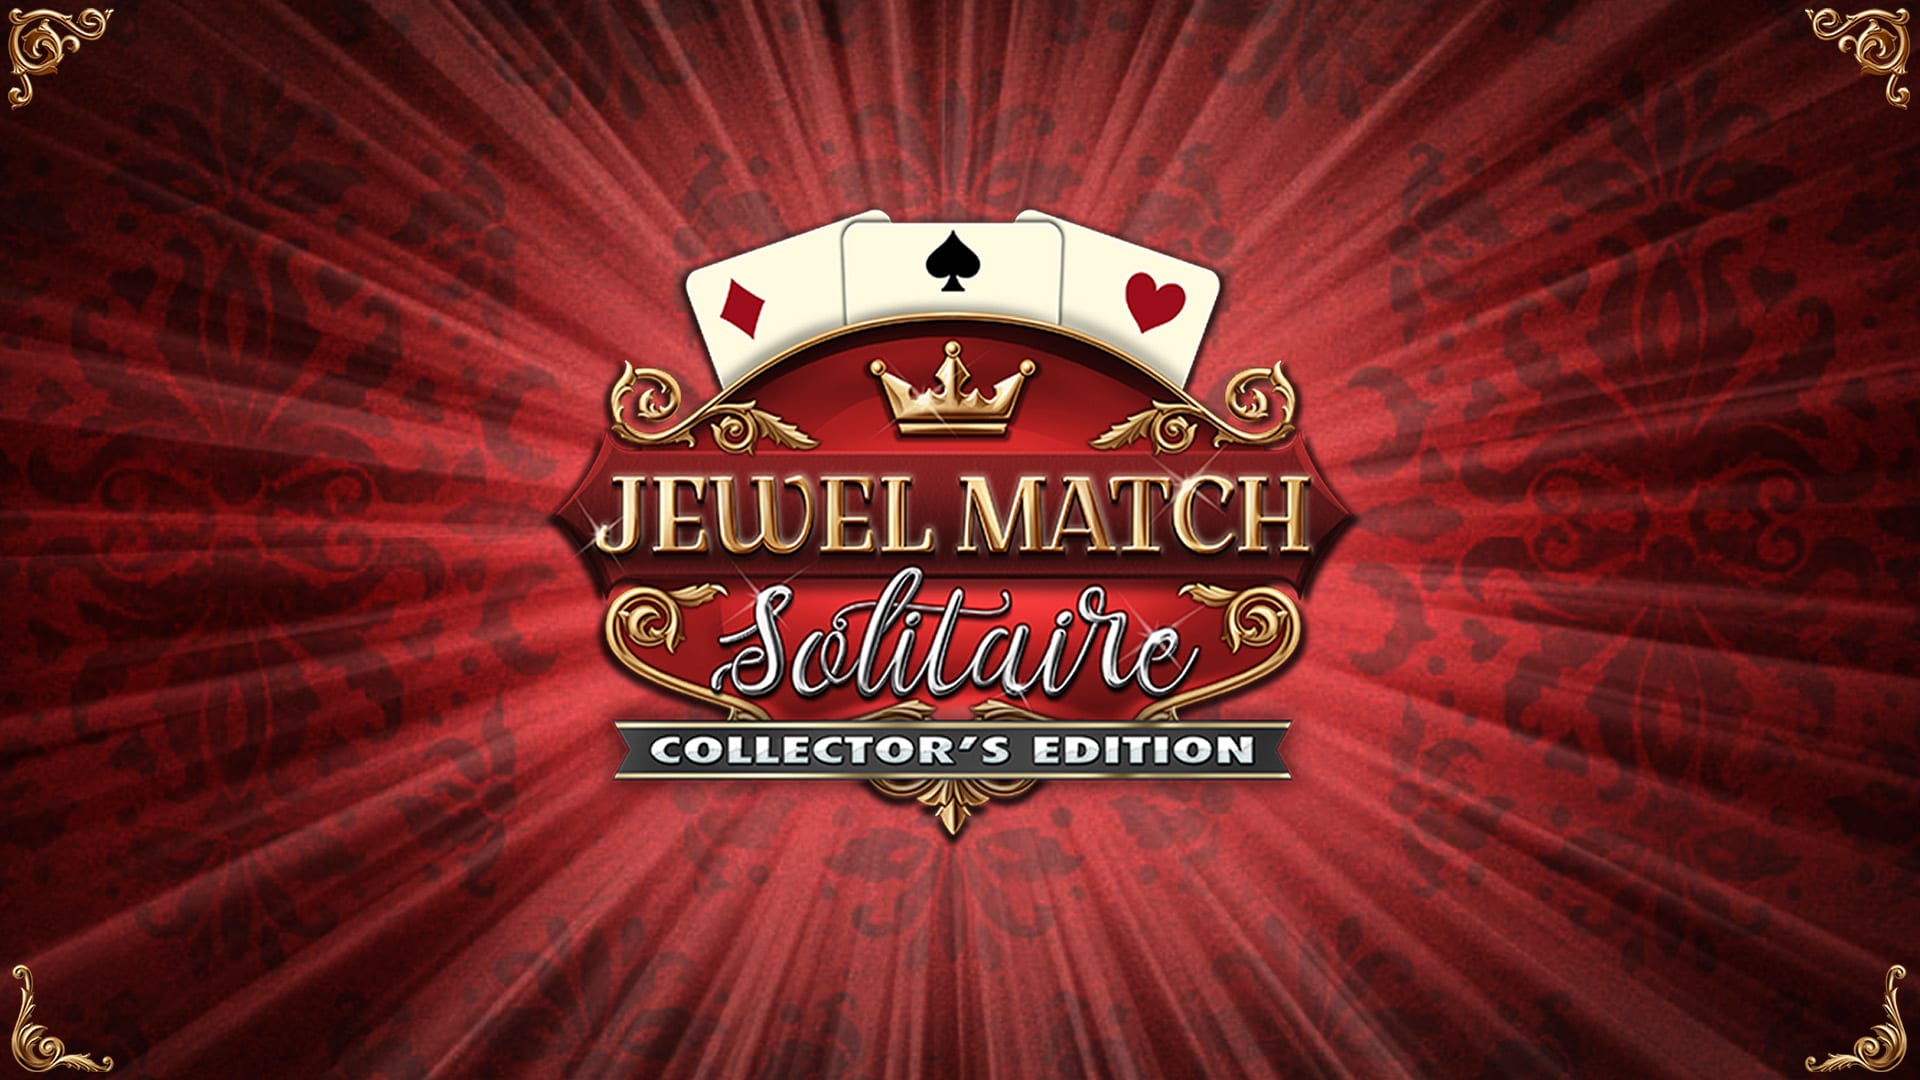 Jewel Match Solitaire Collector's Edition 1